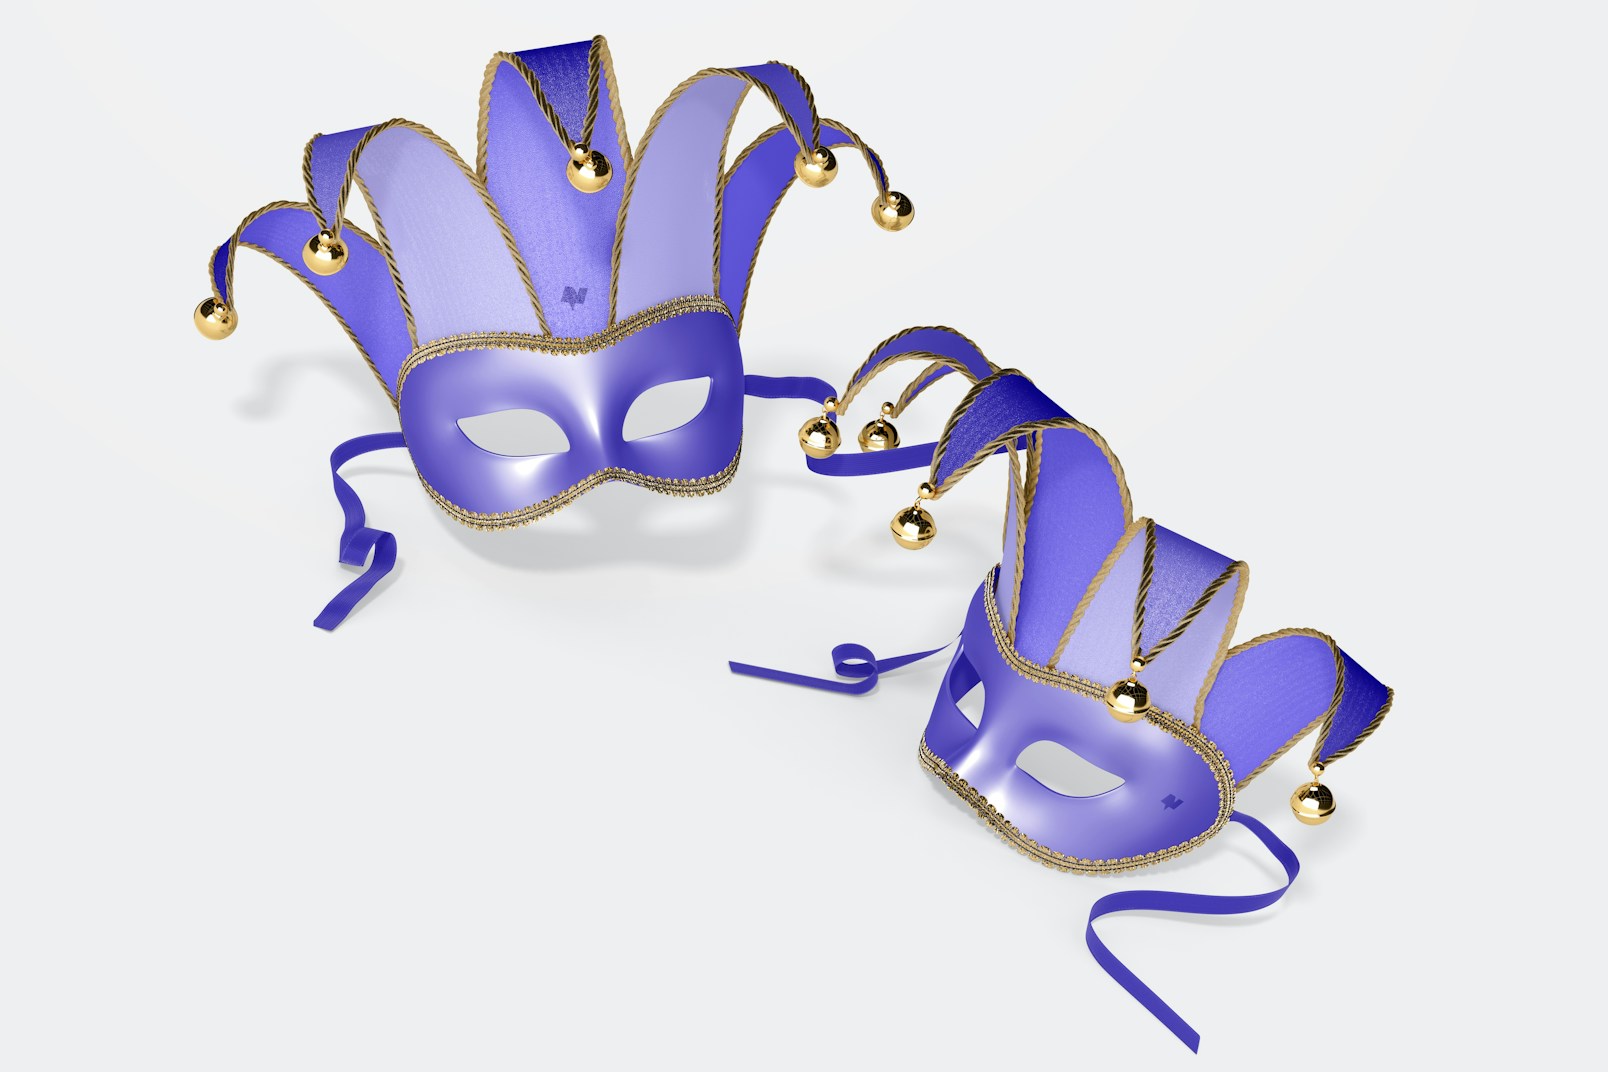 Jester Half-Face Masks Mockup, Right View